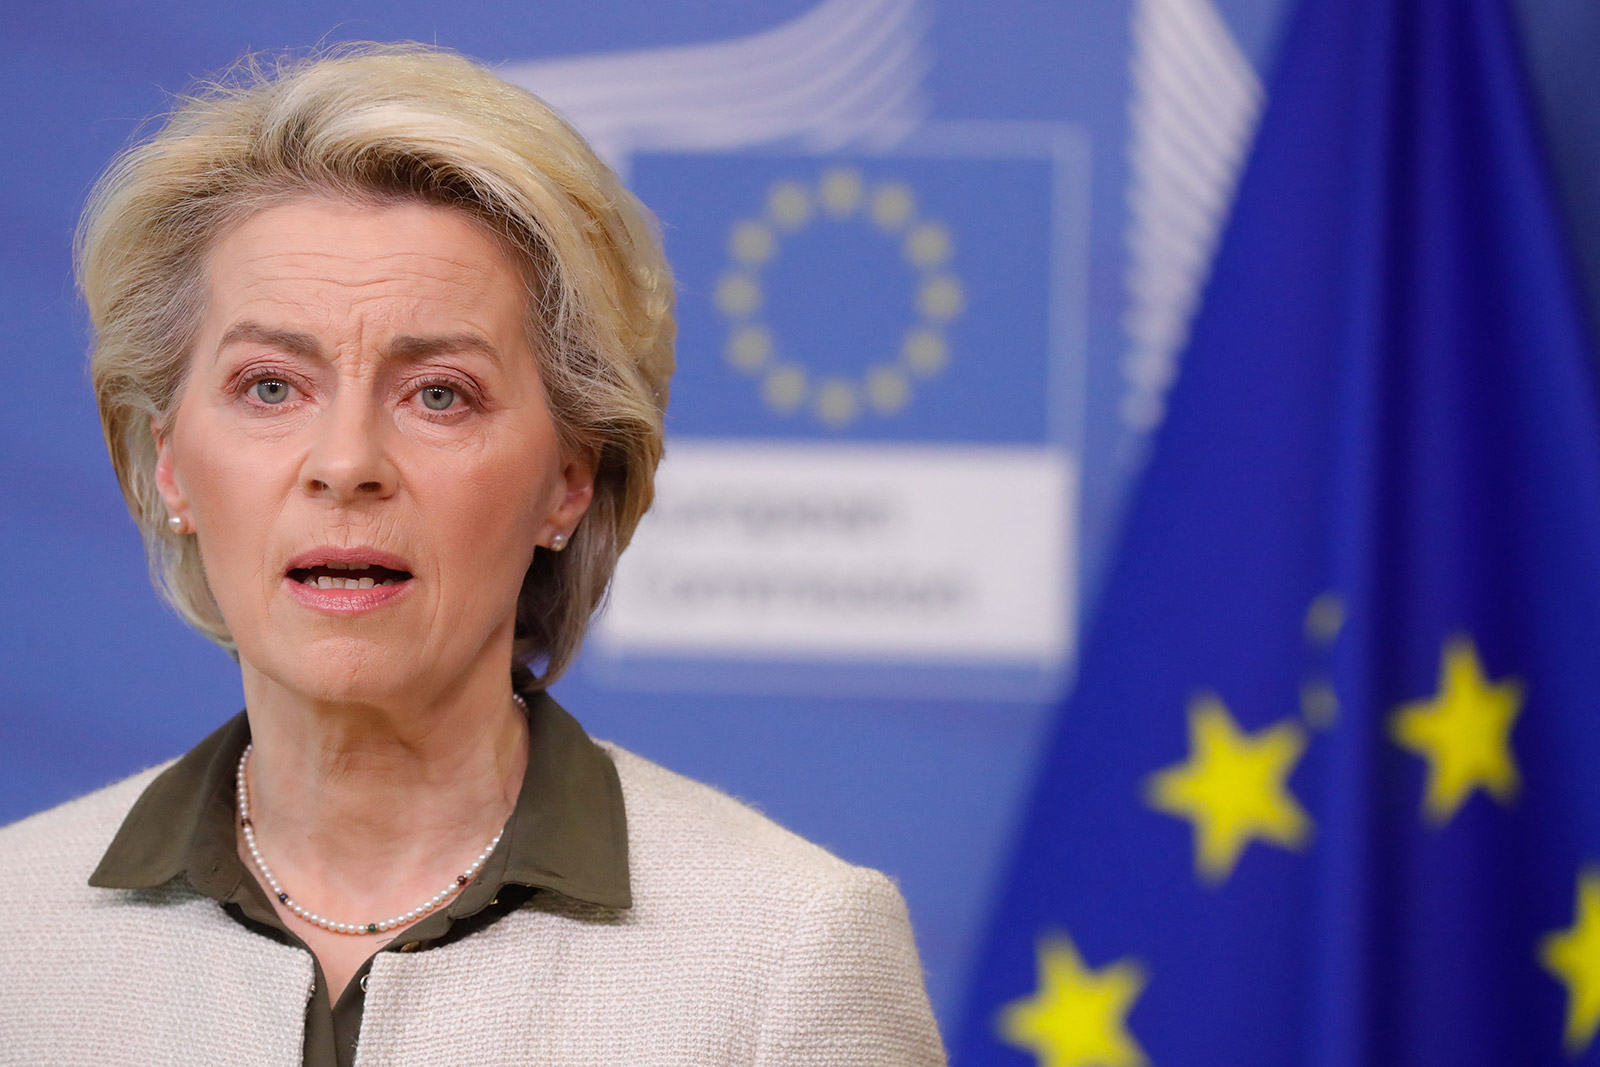 European Commission President Ursula von der Leyen attends a press conference at the European Commission in Brussels on Sunday.